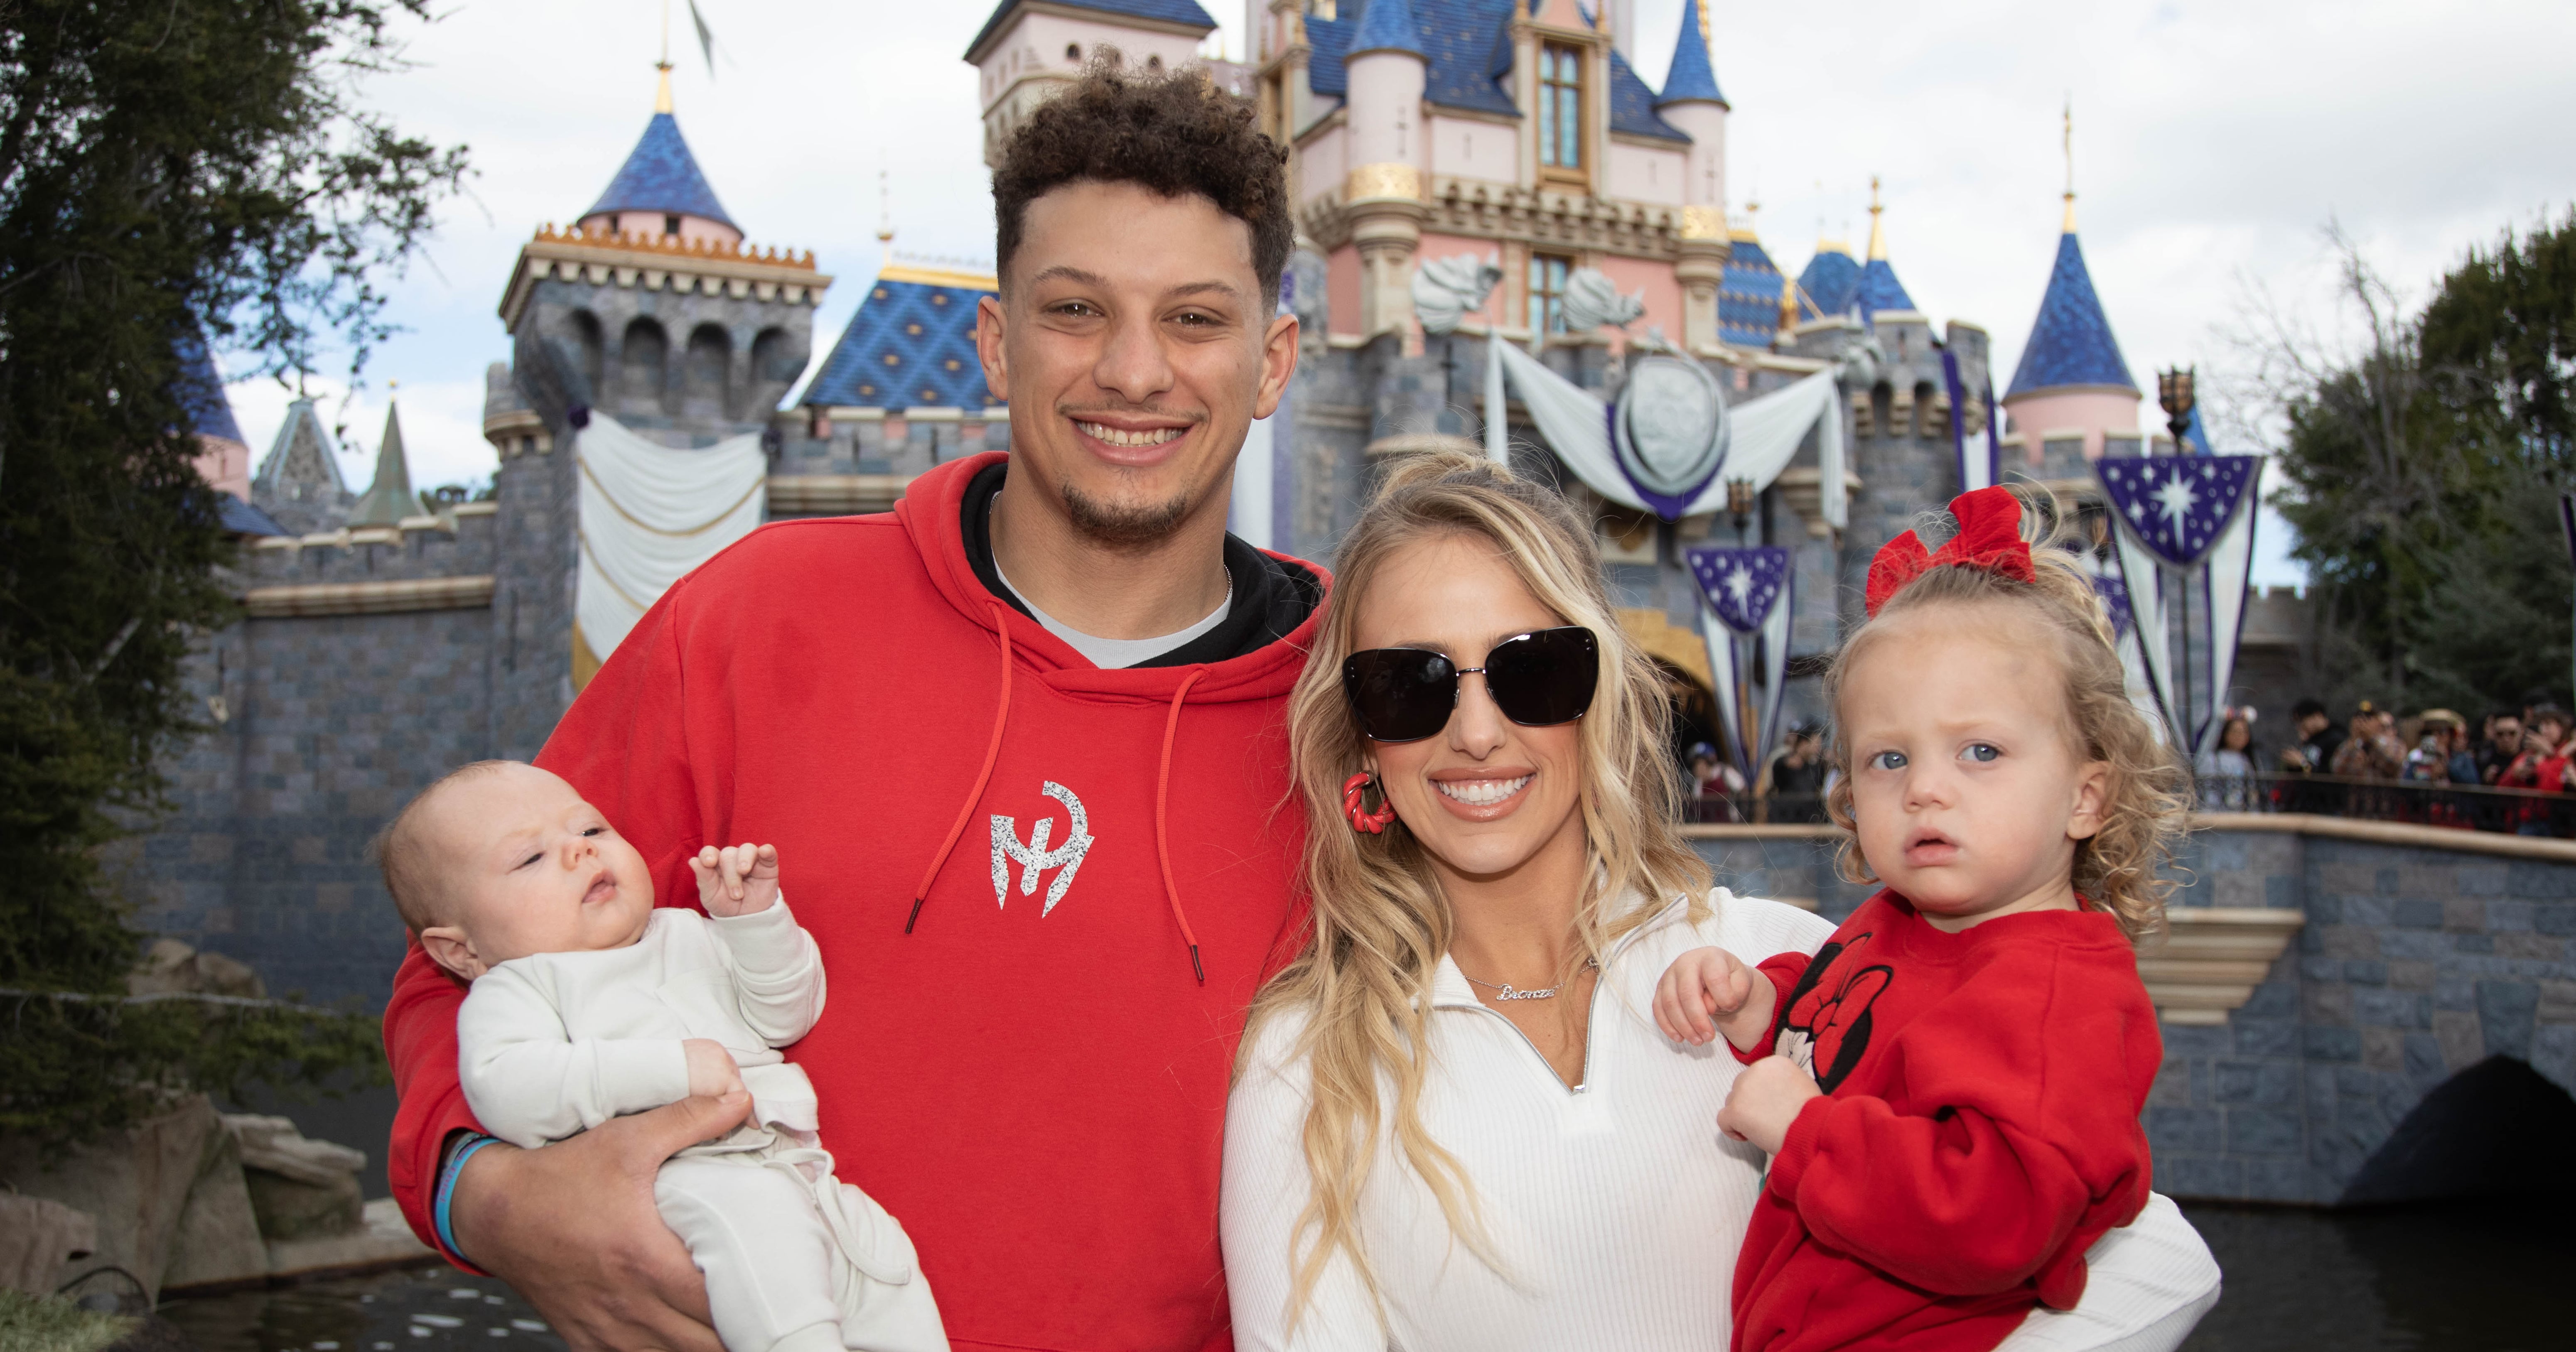 How Many Kids Do Patrick and Brittany Mahomes Have?